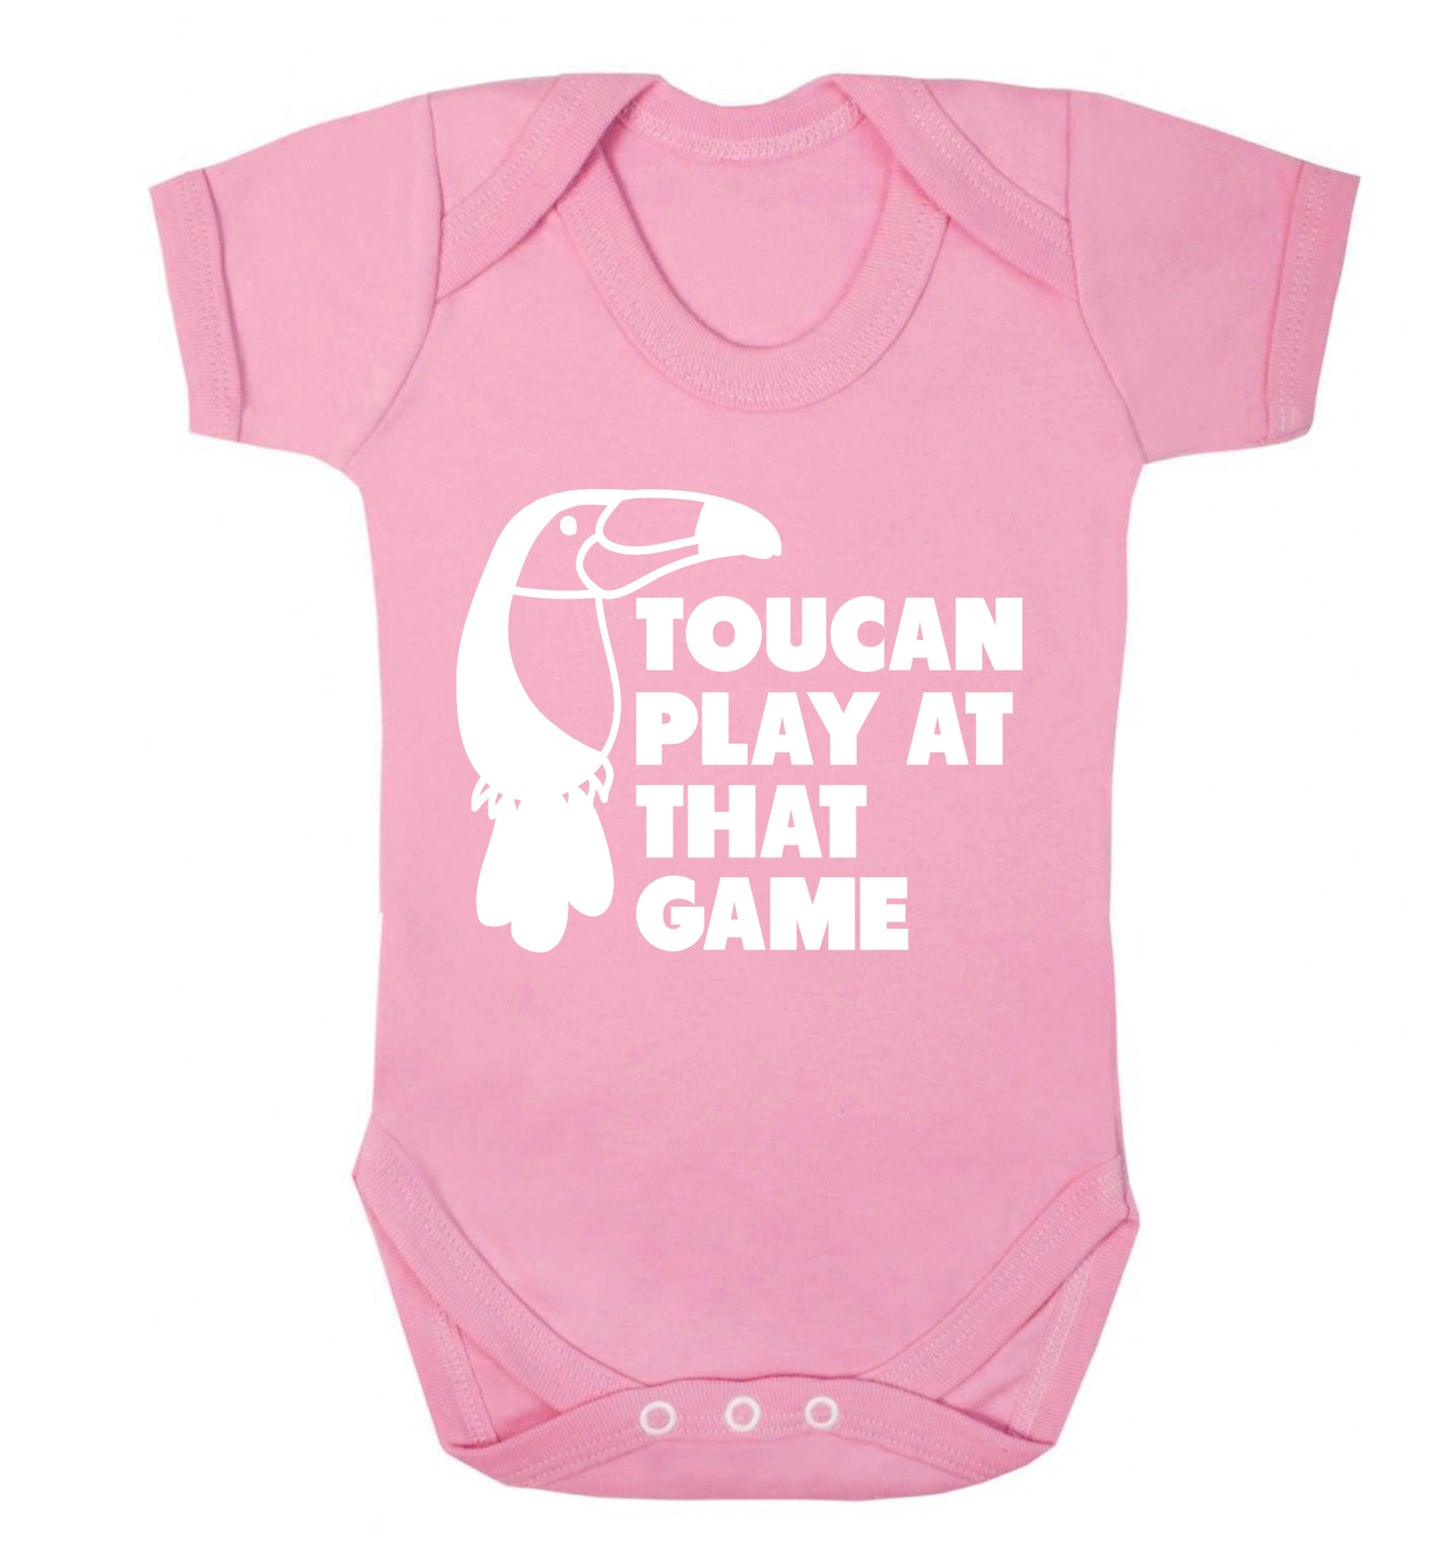 Toucan play at that game Baby Vest pale pink 18-24 months